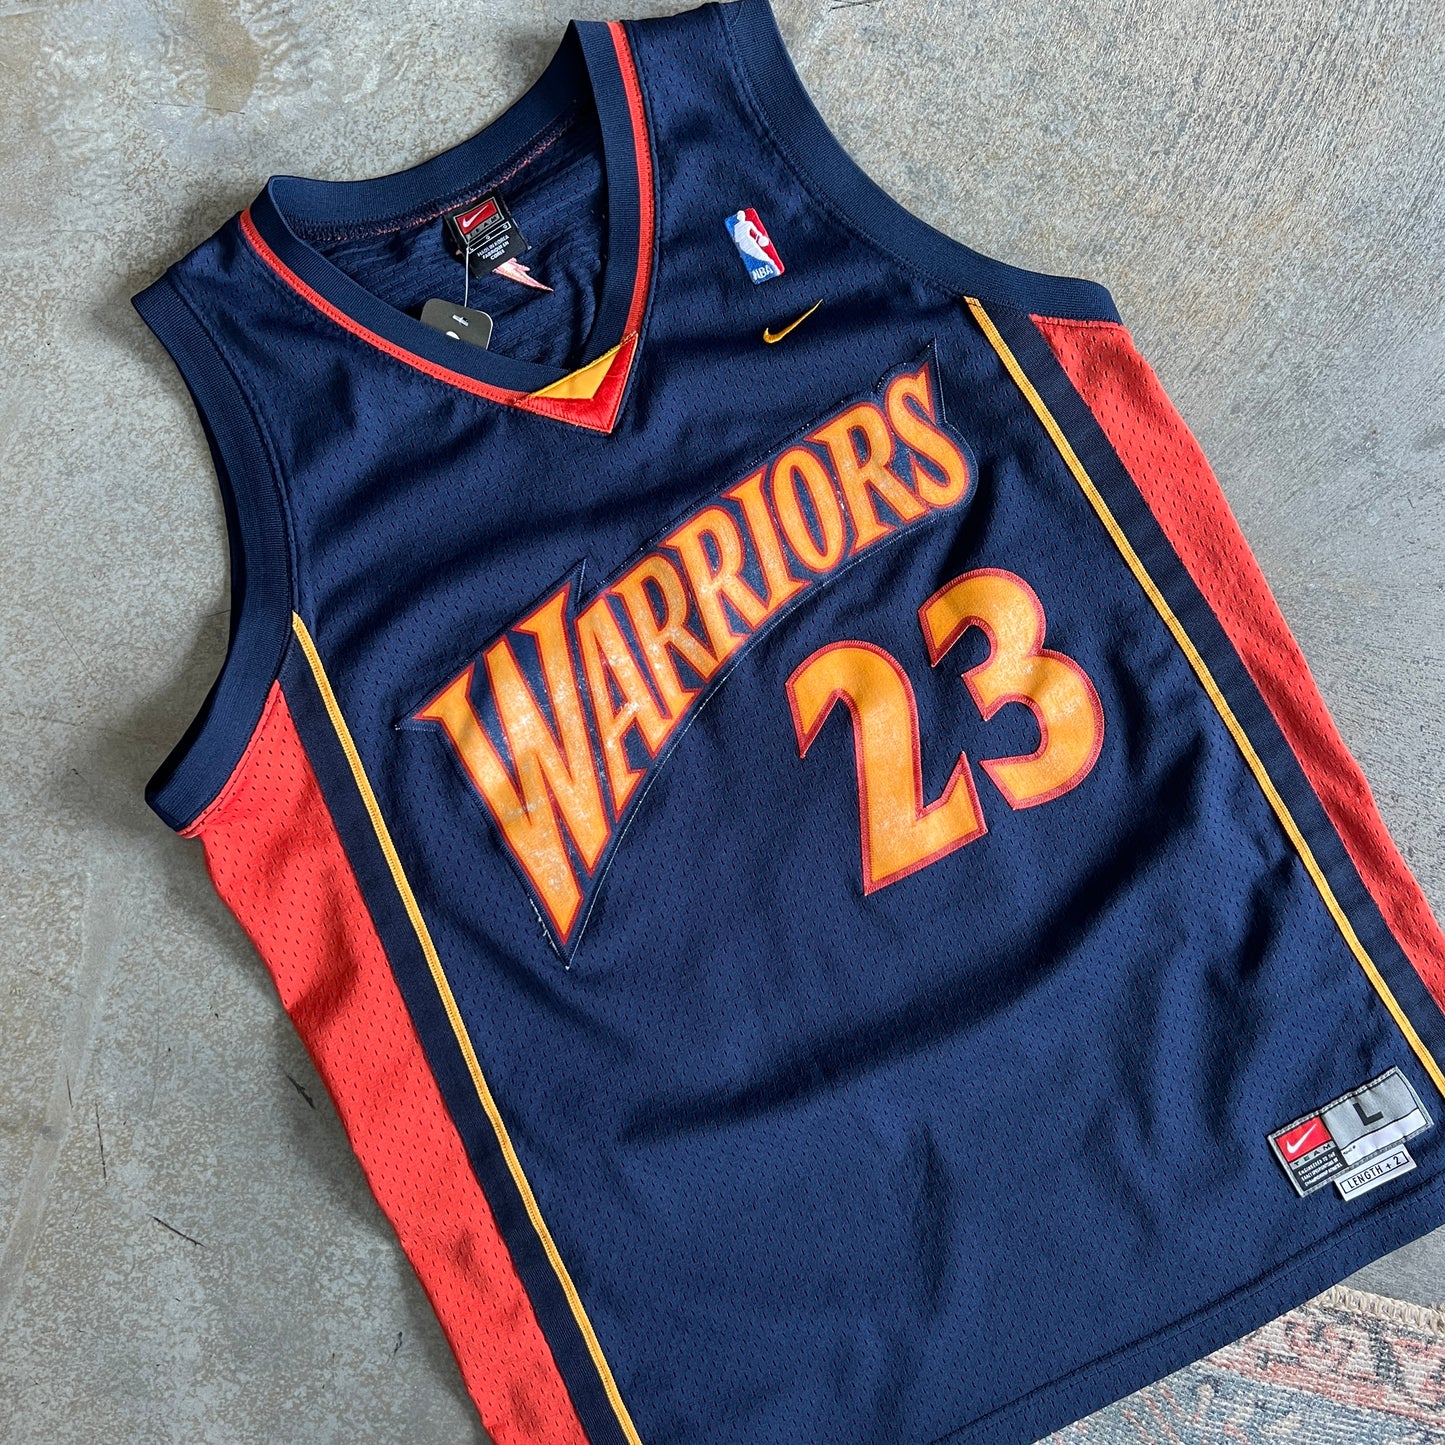 Load image into Gallery viewer, Richardson Warriors Jersey - L/XL
